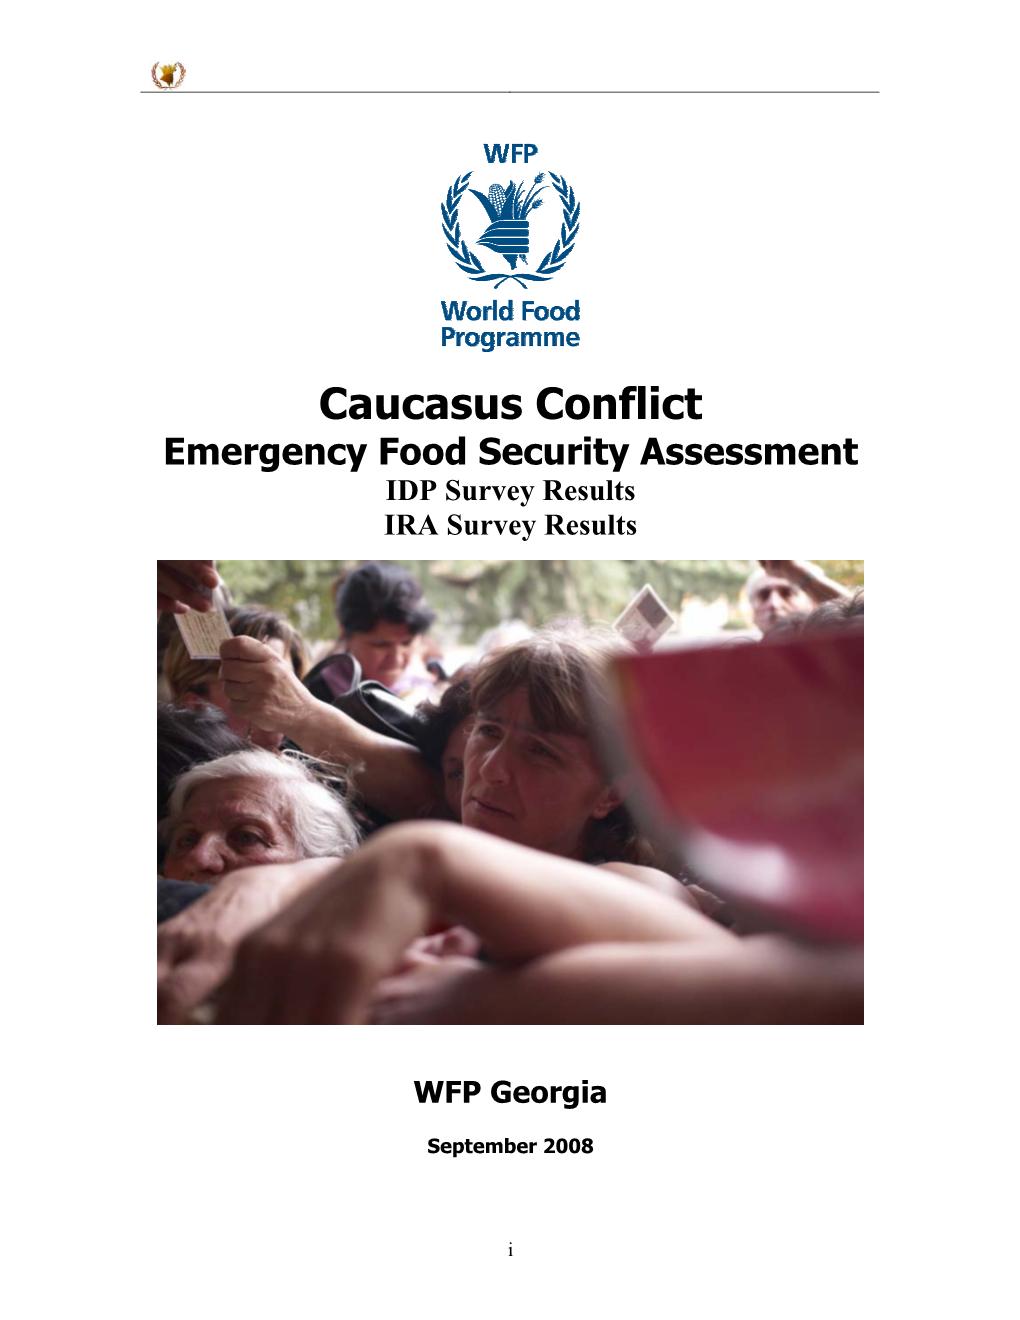 Caucasus Conflict Emergency Food Security Assessment IDP Survey Results IRA Survey Results